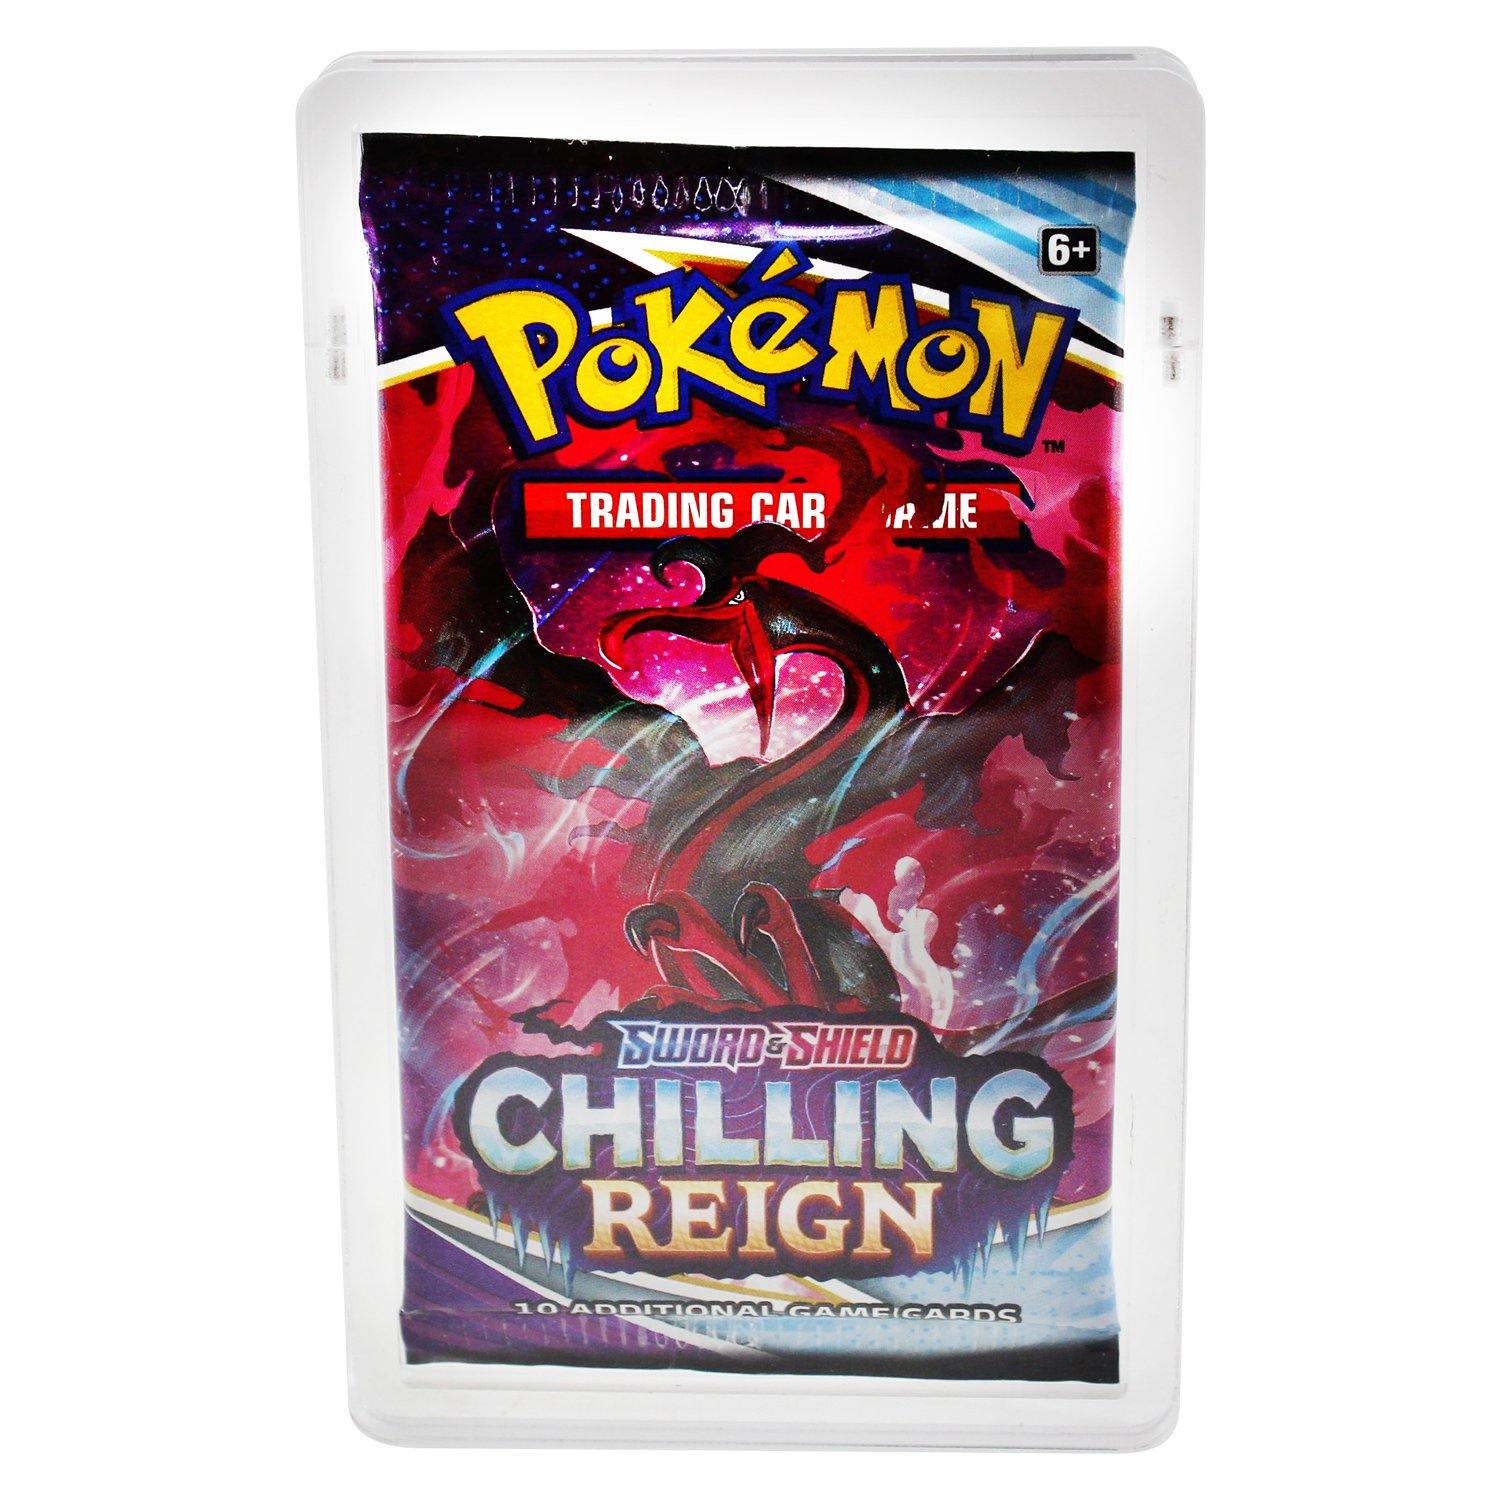 Premium Acrylic Holder & Stand for Pokemon Booster Packs with Magnetic Top - Platinum Protectors